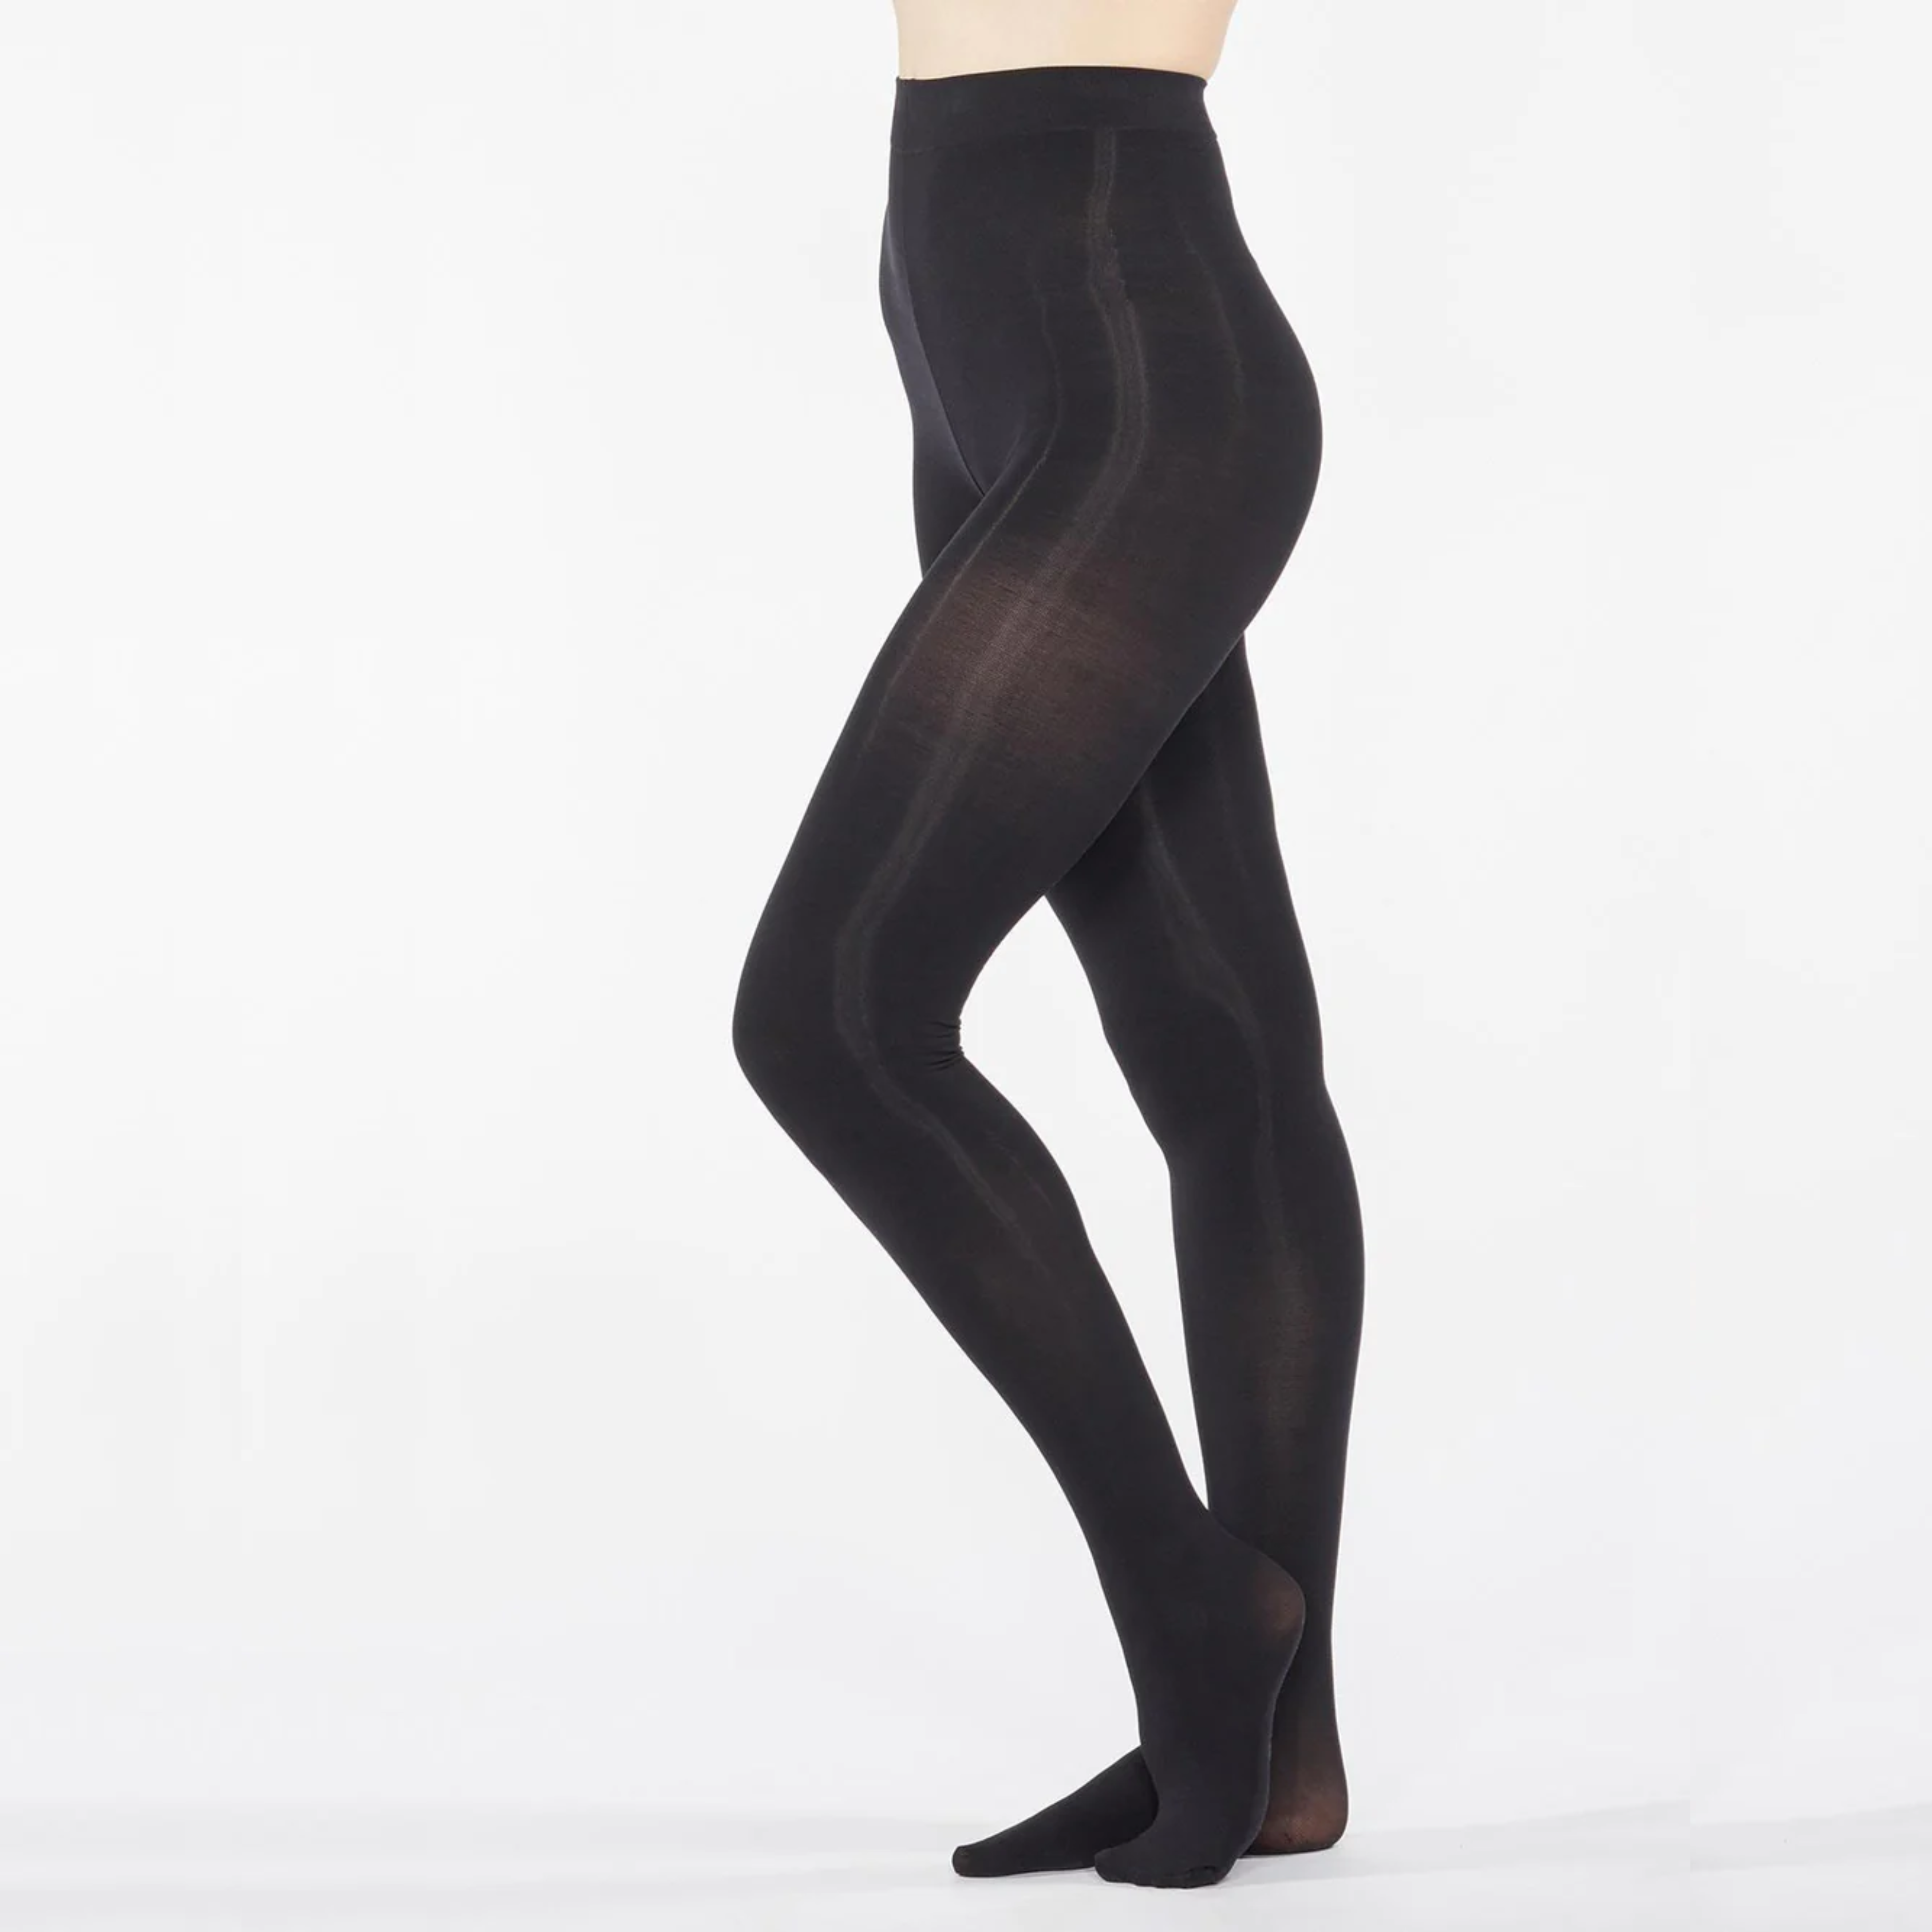 Recycled Nylon Essentials Tights (Women's)